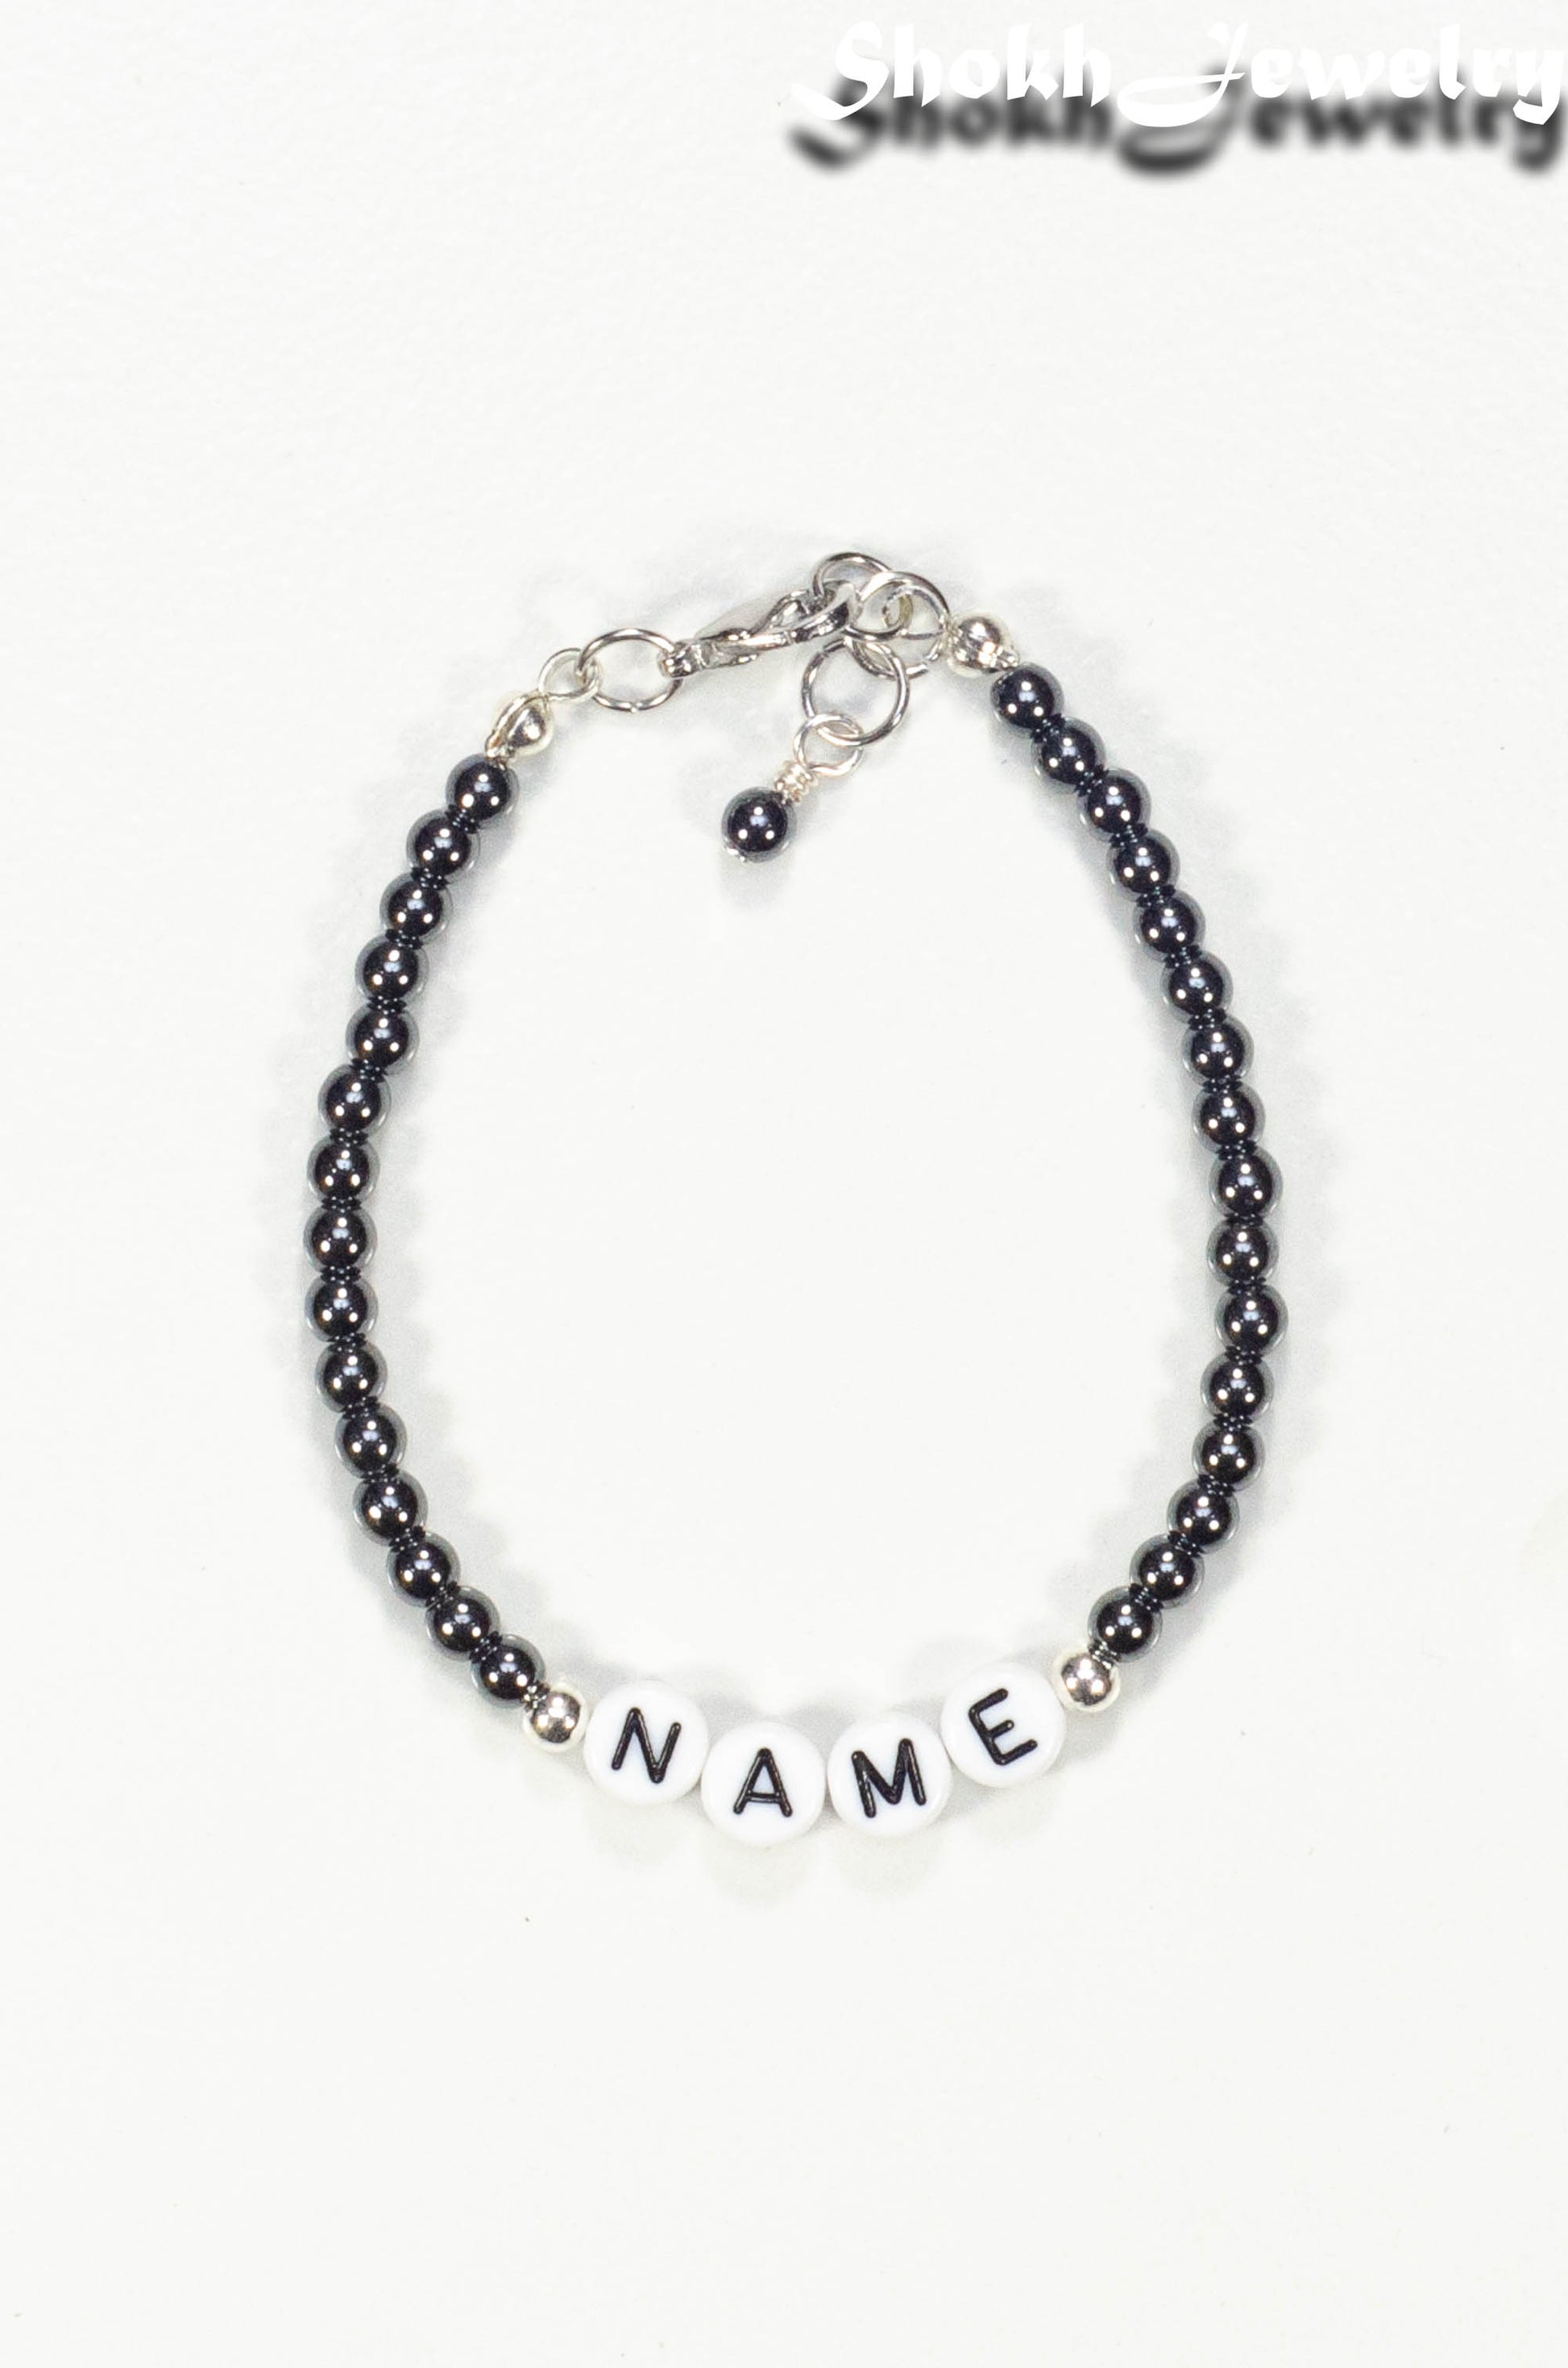 Top view of Personalized Hematite Stone Name Bracelet with Clasp.